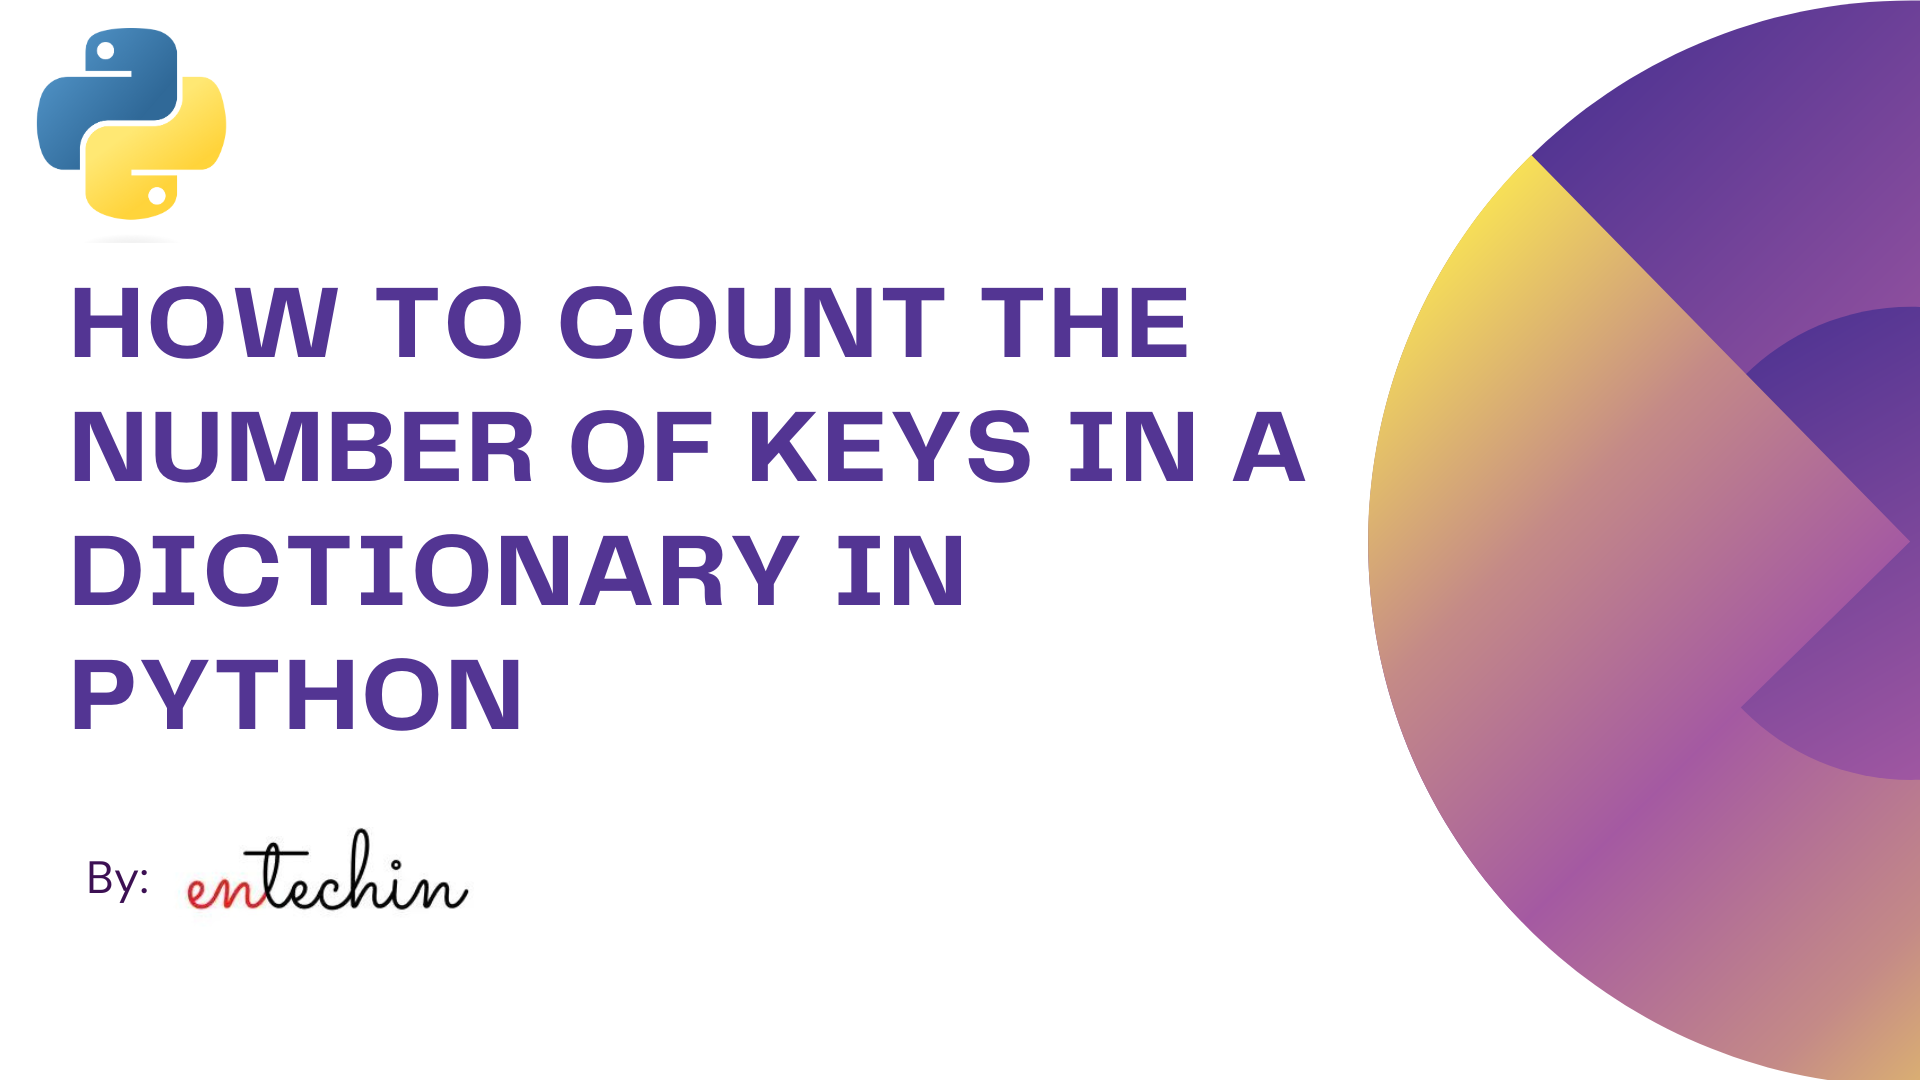 How to count the number of keys in a dictionary in Python